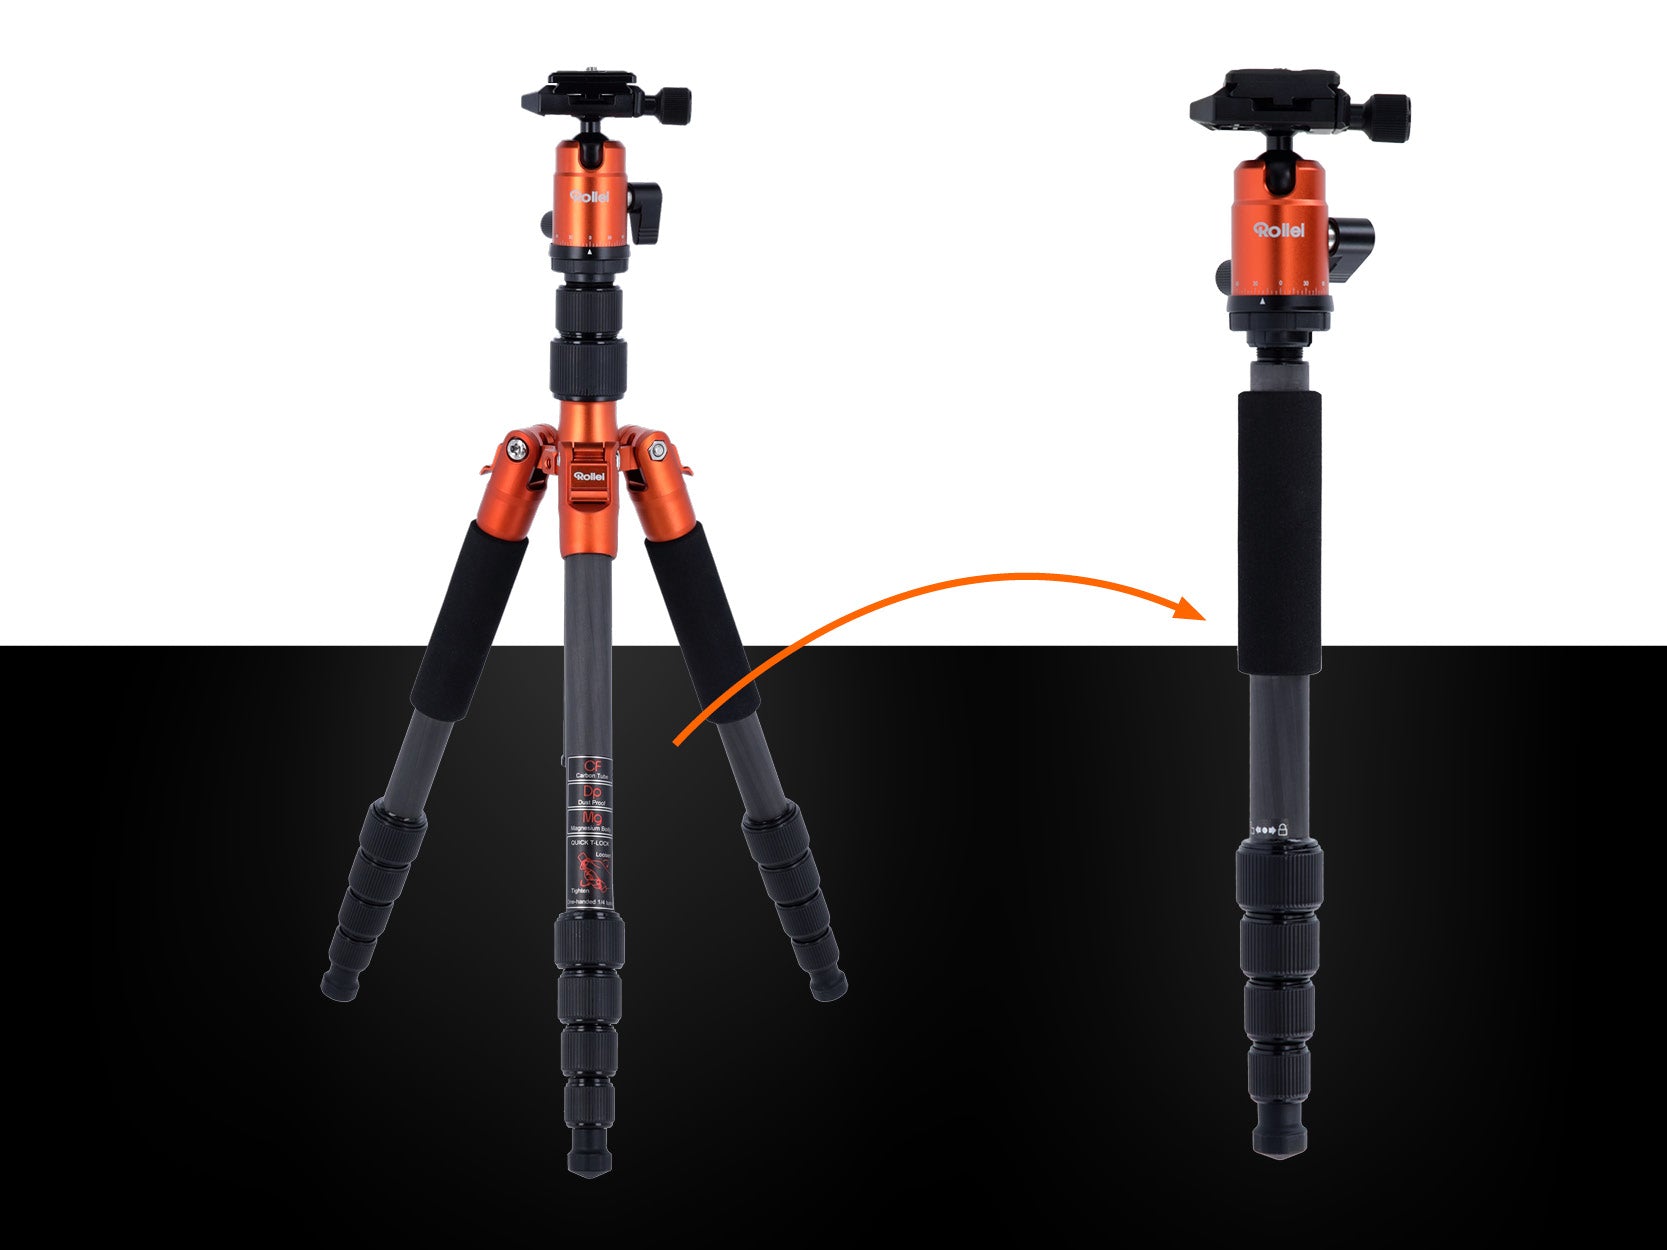 One-leg-tripod conversion: for sharp recordings in movement and in tight rooms